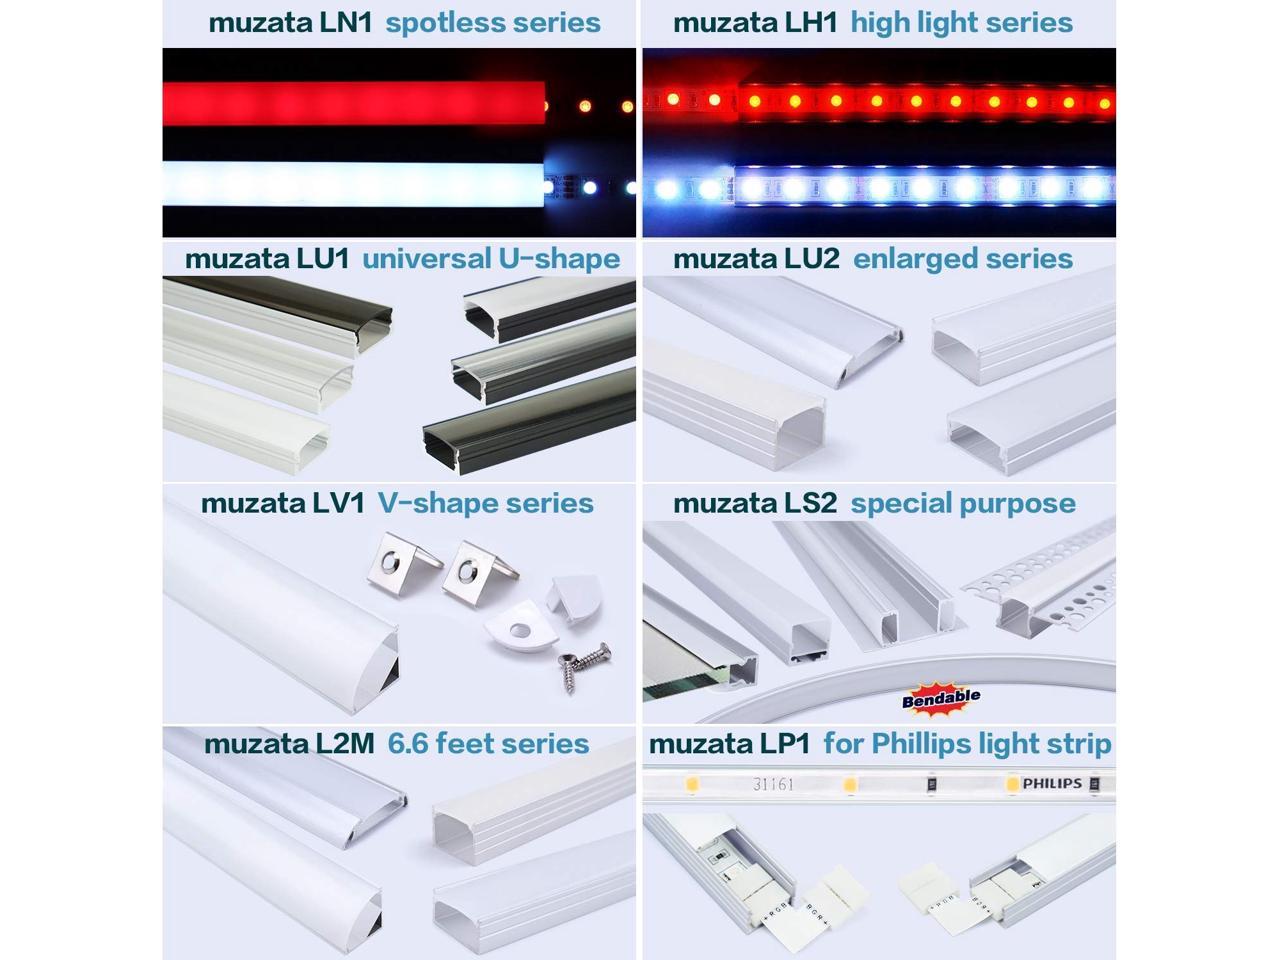 Muzata LED Channel with Spotless Lighting Effect Frosted Diffuser Cover,16mm Super Wide Aluminum Profile Track for Waterproof Strip Light-Philips Hue Plus Video 10Pack 3.3Ft U103,Series LU2 LP1 LN1 